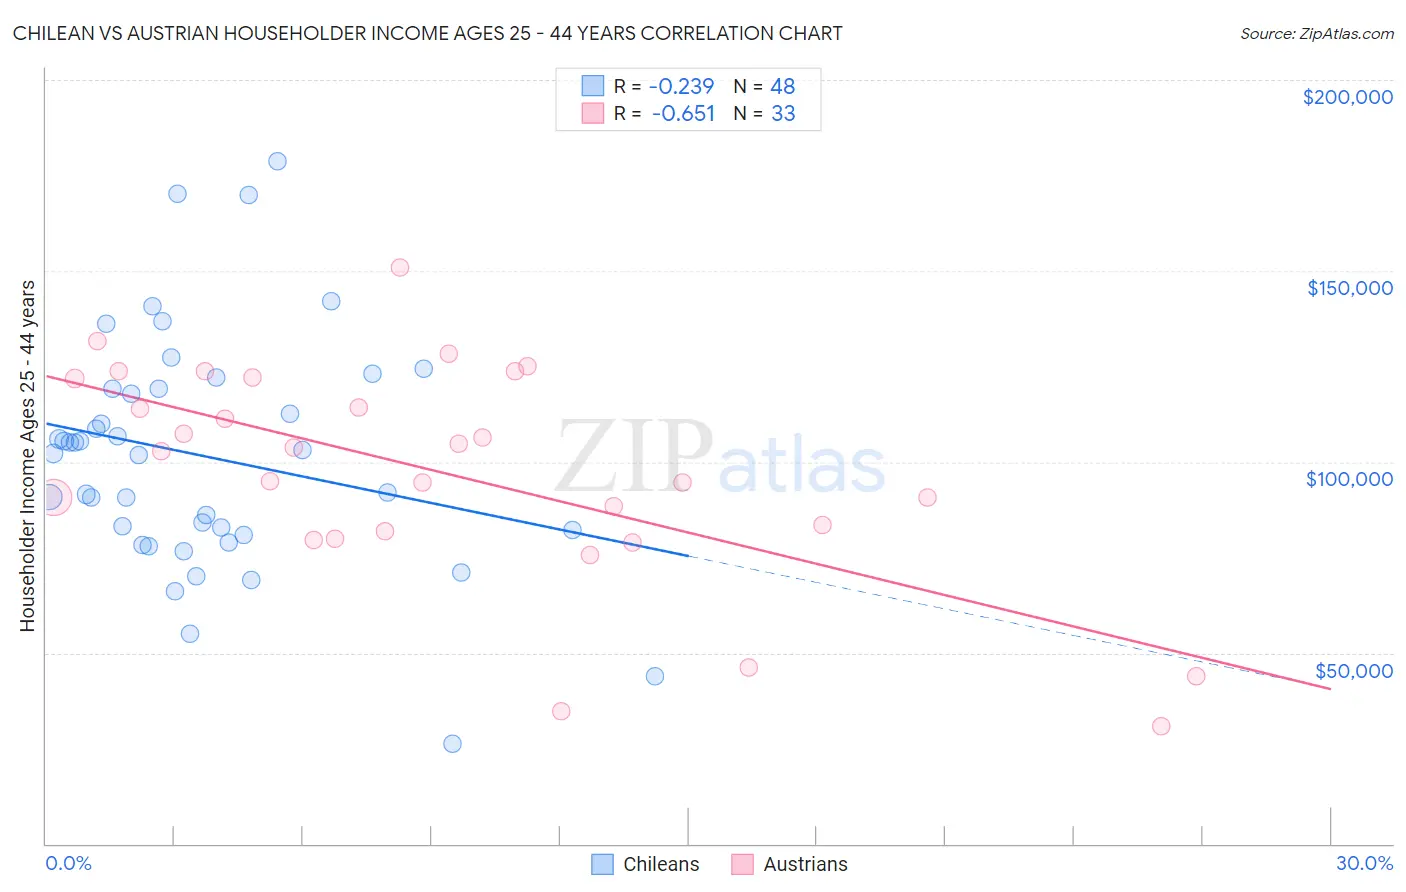 Chilean vs Austrian Householder Income Ages 25 - 44 years